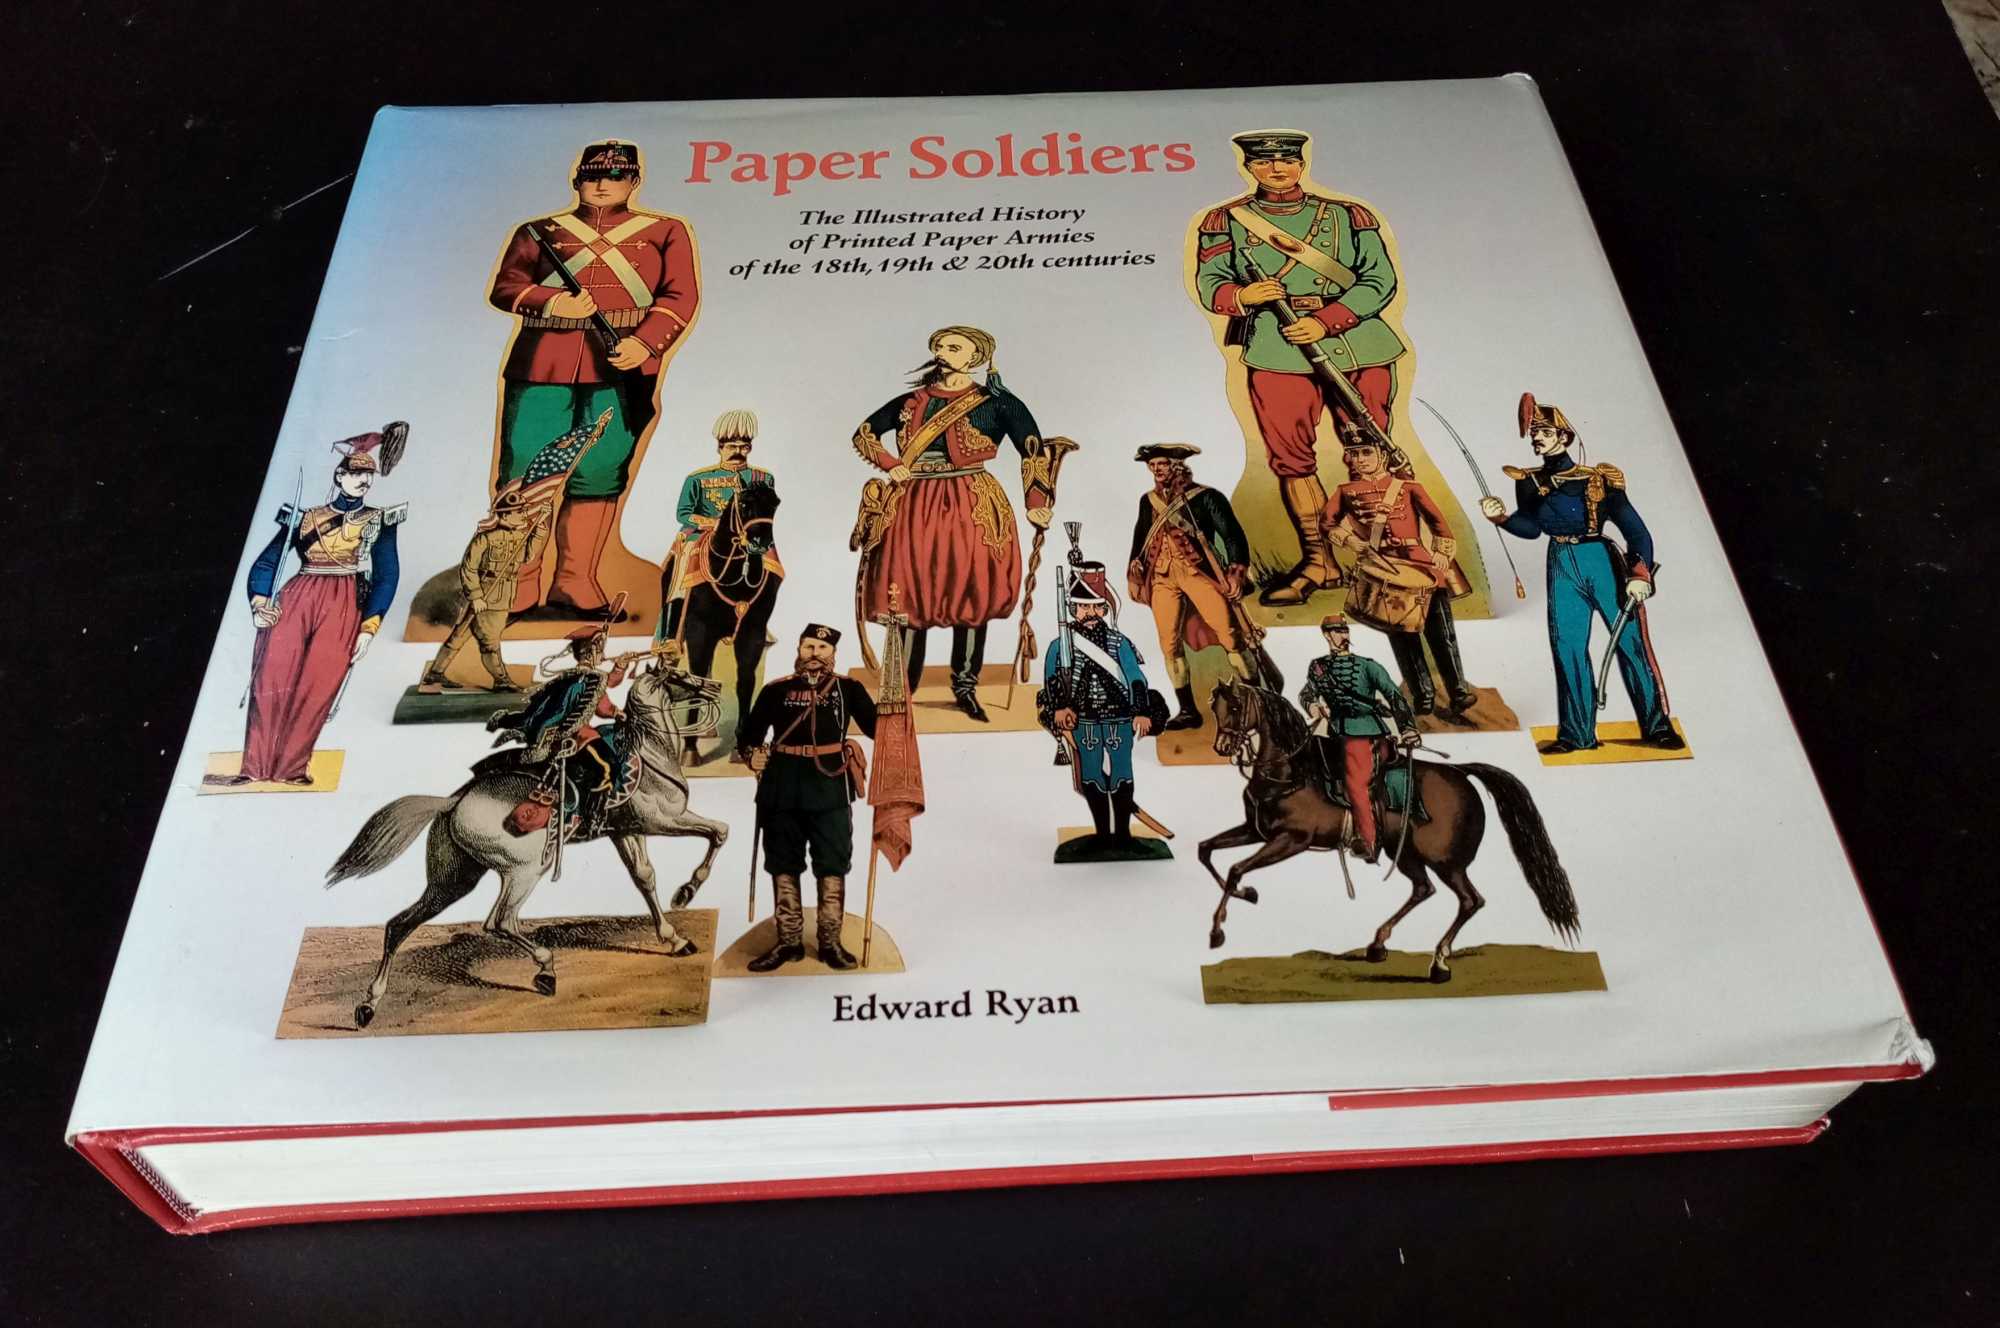 Edward Ryan - Paper Soldiers; The Illustrated History of Printed Paper Armies of the 18th, 19th & 20th Centuries